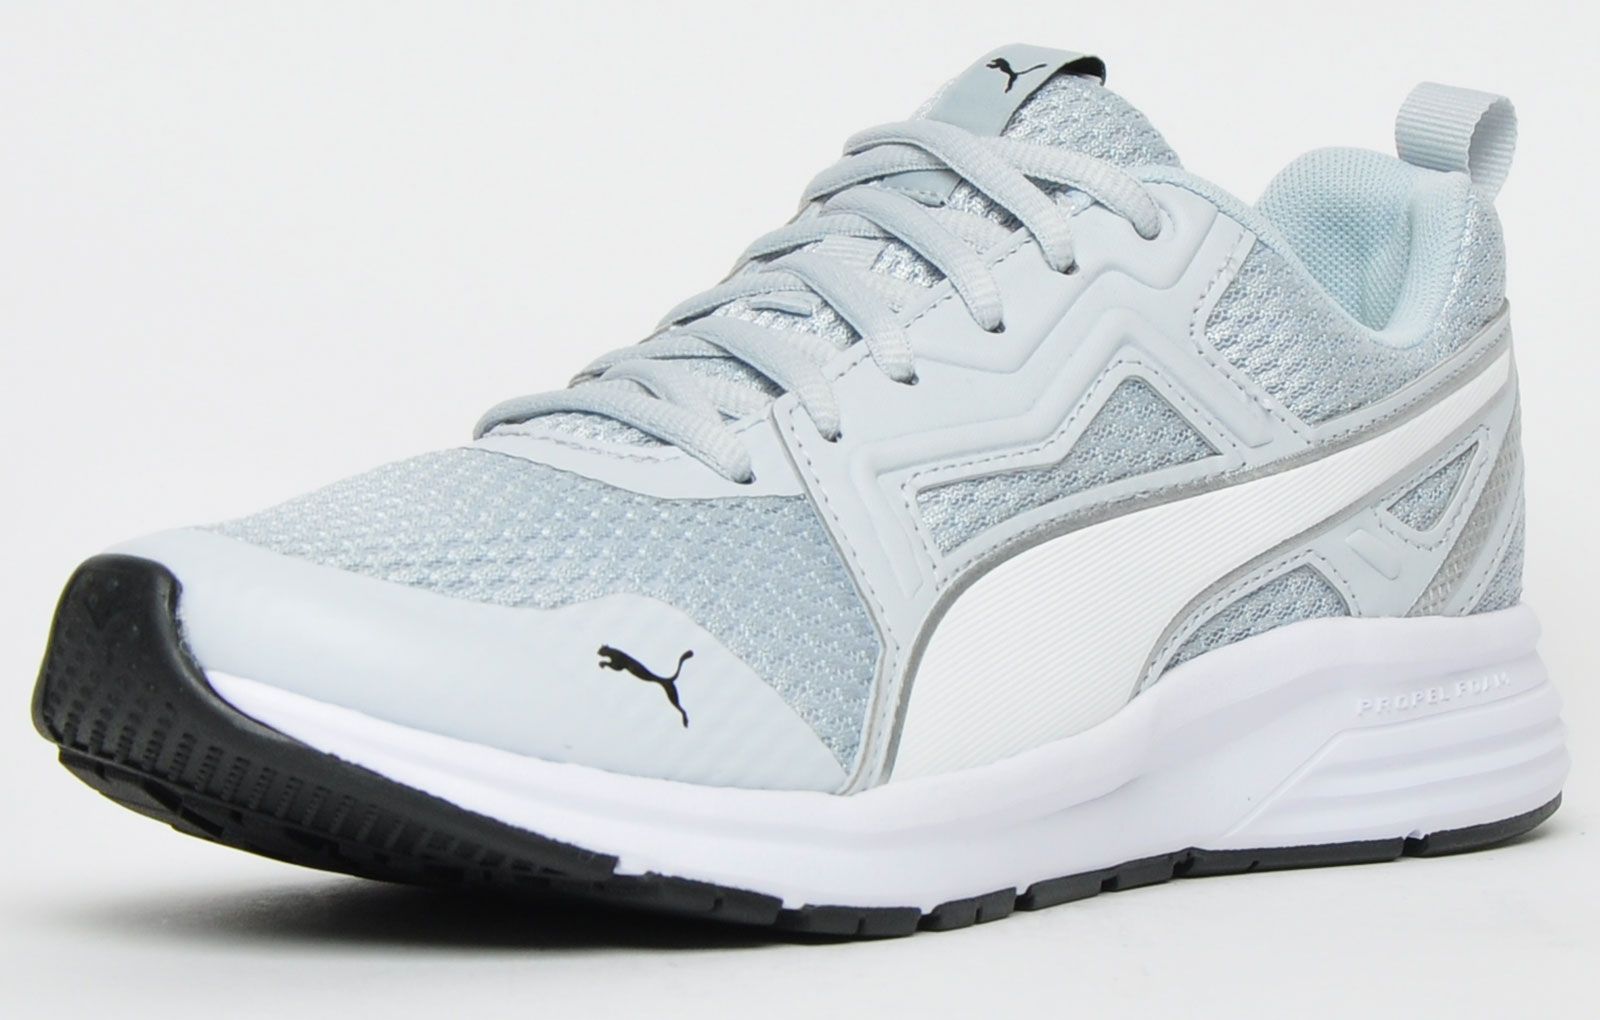 <p>These Mens Puma Pure Jogger Trainers give a clean and classic look combining sleek, textile mesh uppers with synthetic overlays with a progressive running-inspired silhouette giving them a modern and clean look. <br></p><p class=